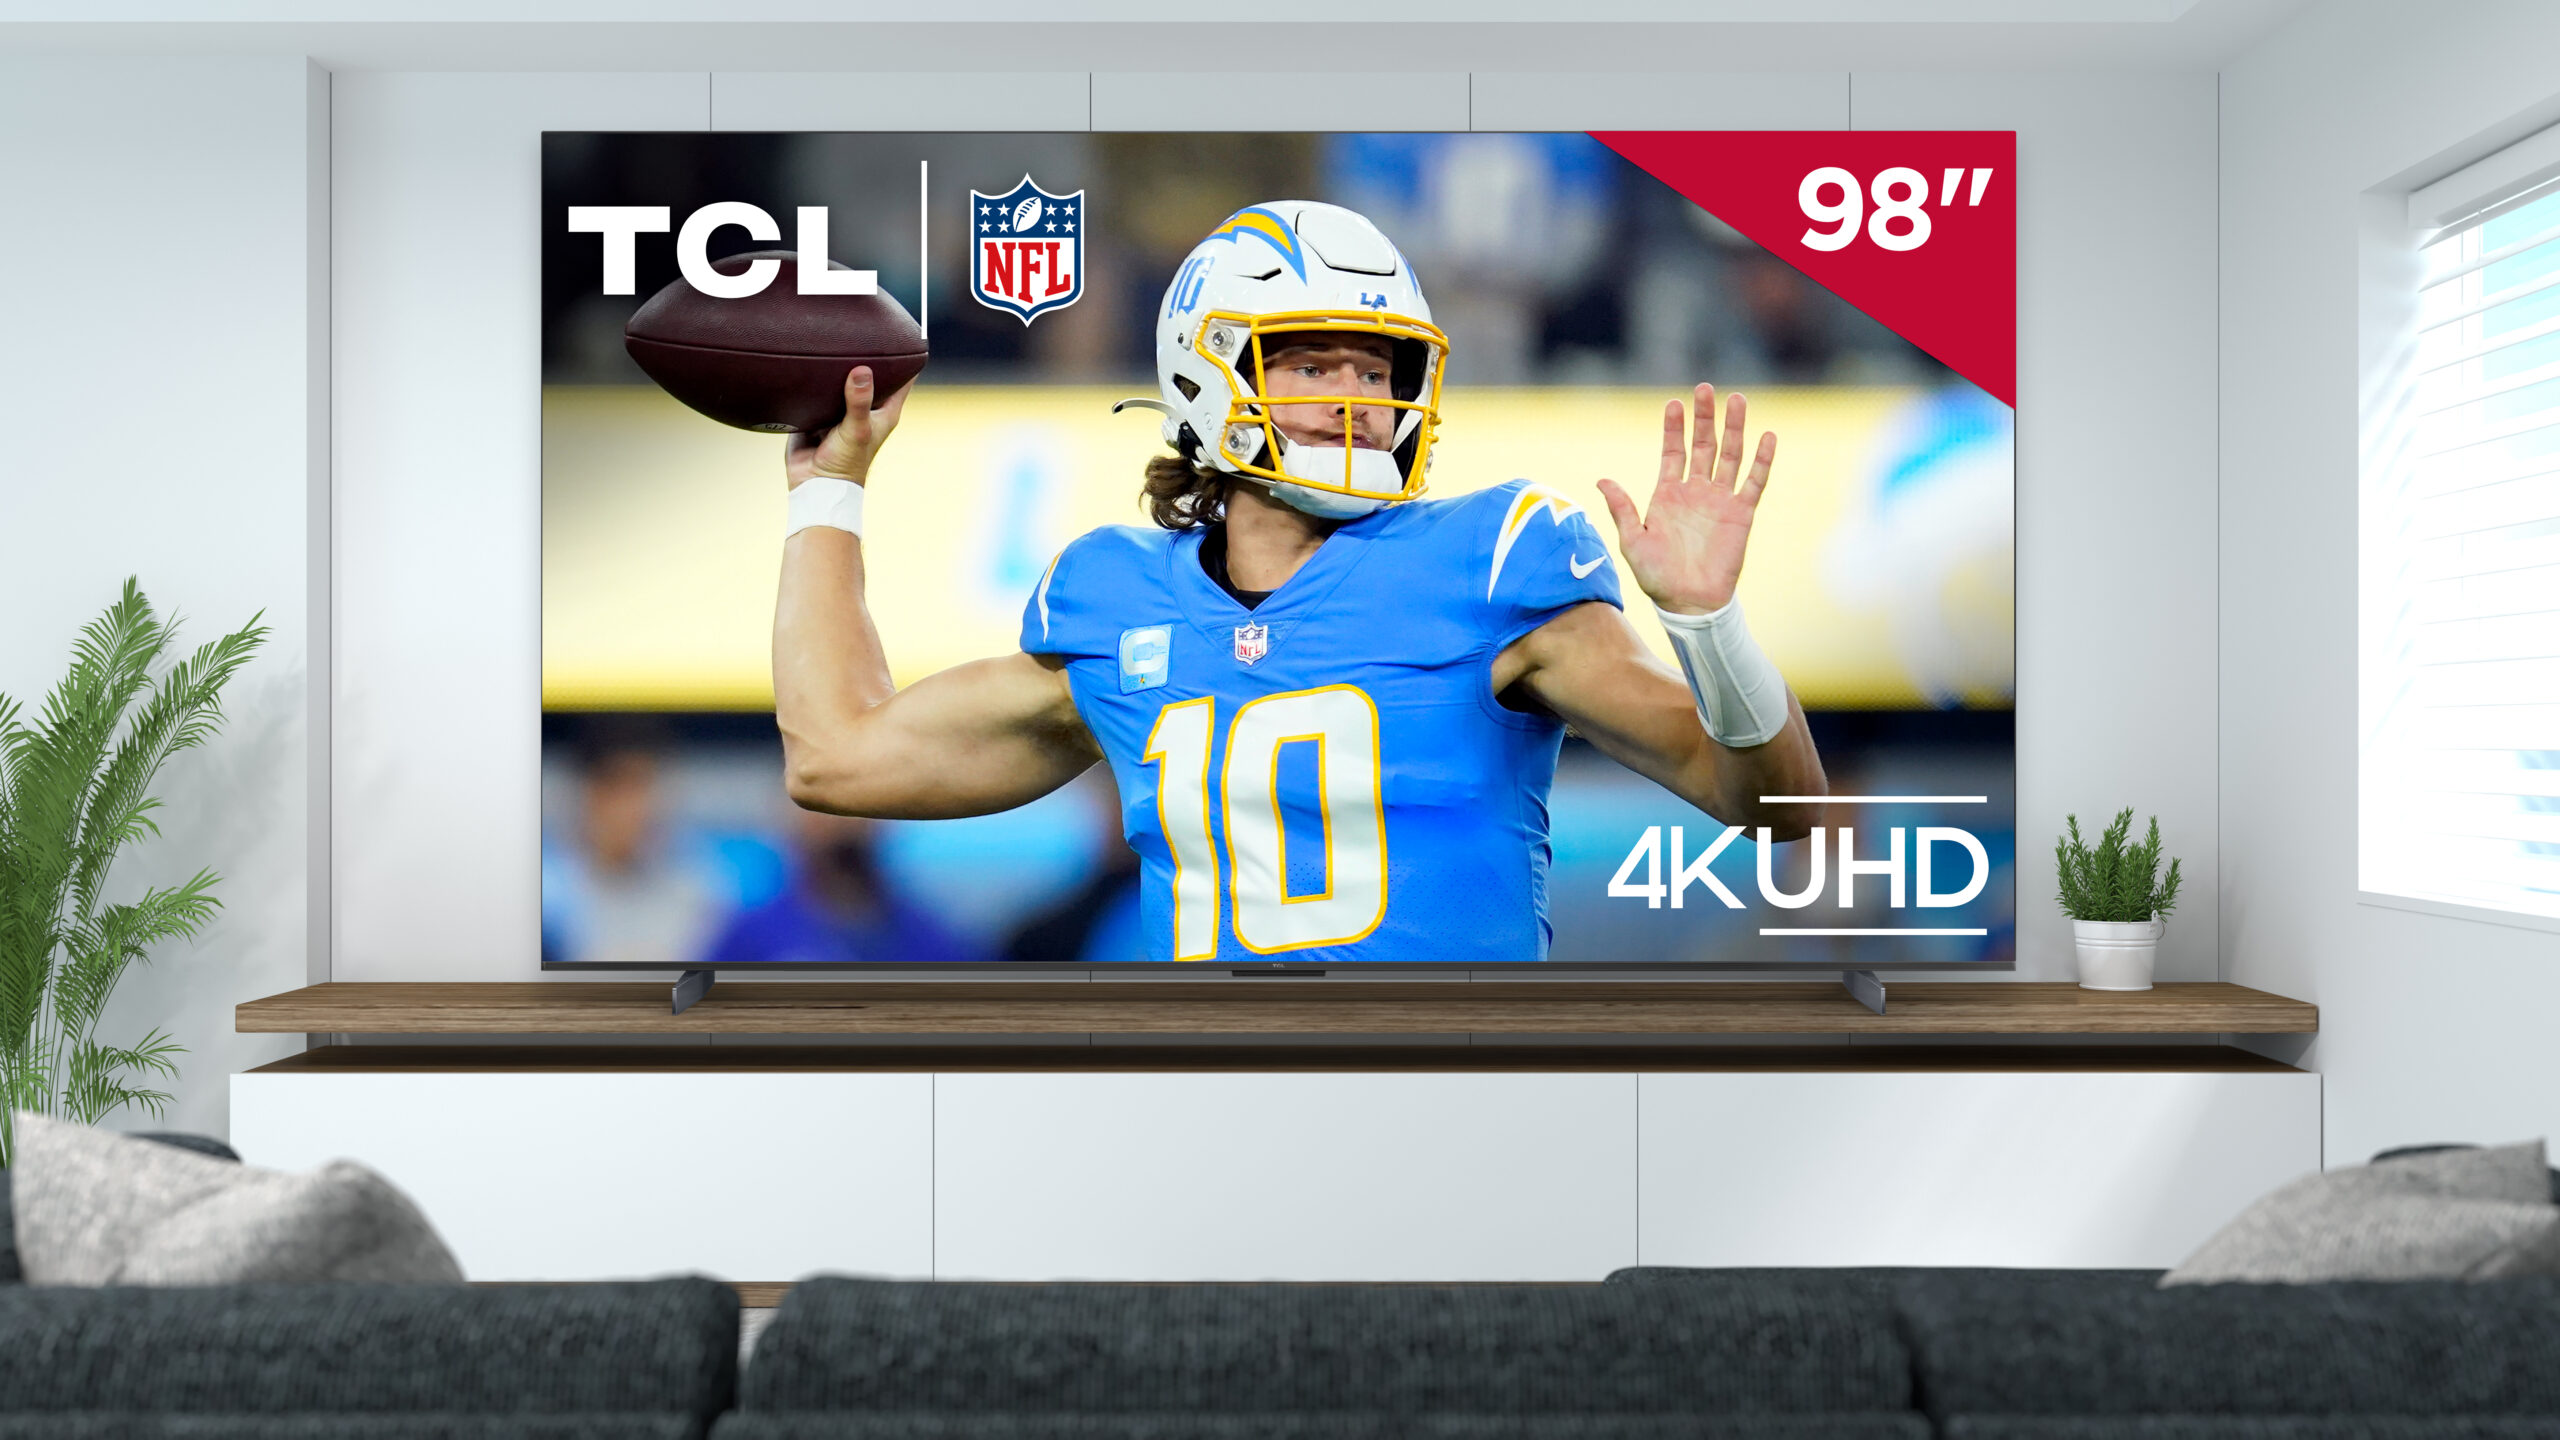 TCL’s new 98-inch S5 TV is available with an NFL Sunday Ticket deal